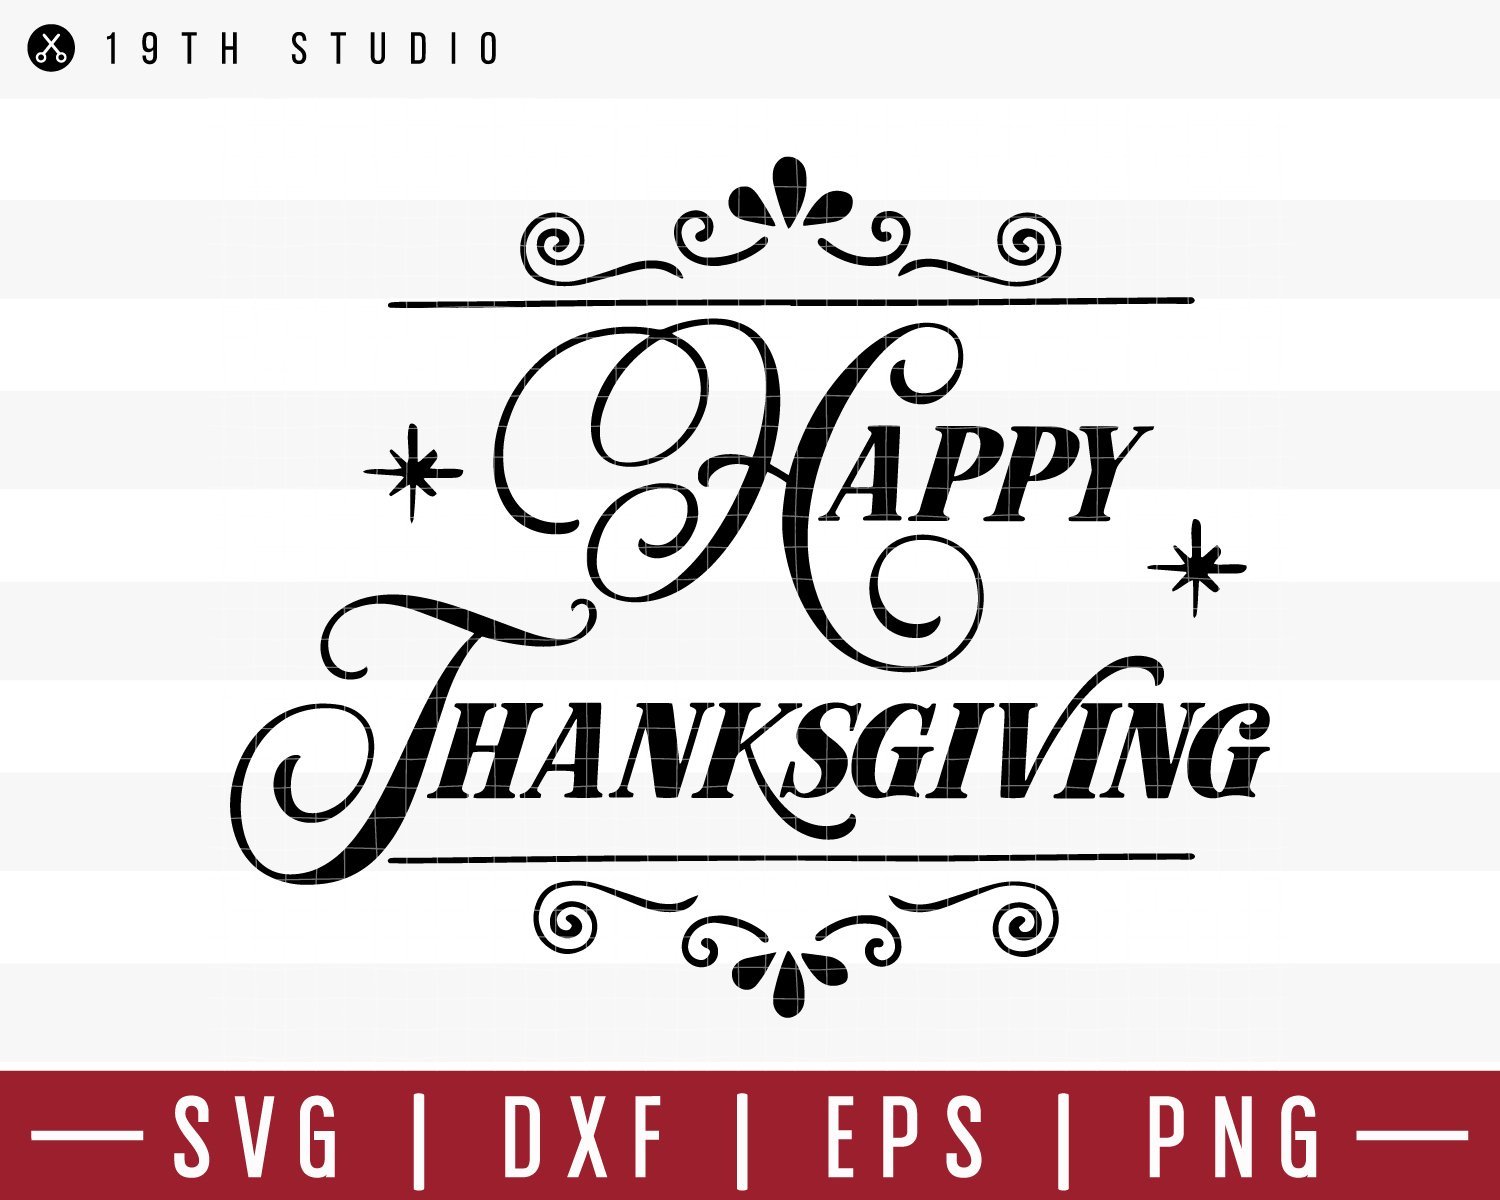 Happy Thanksgiving SVG | M39F9 Craft House SVG - SVG files for Cricut and Silhouette